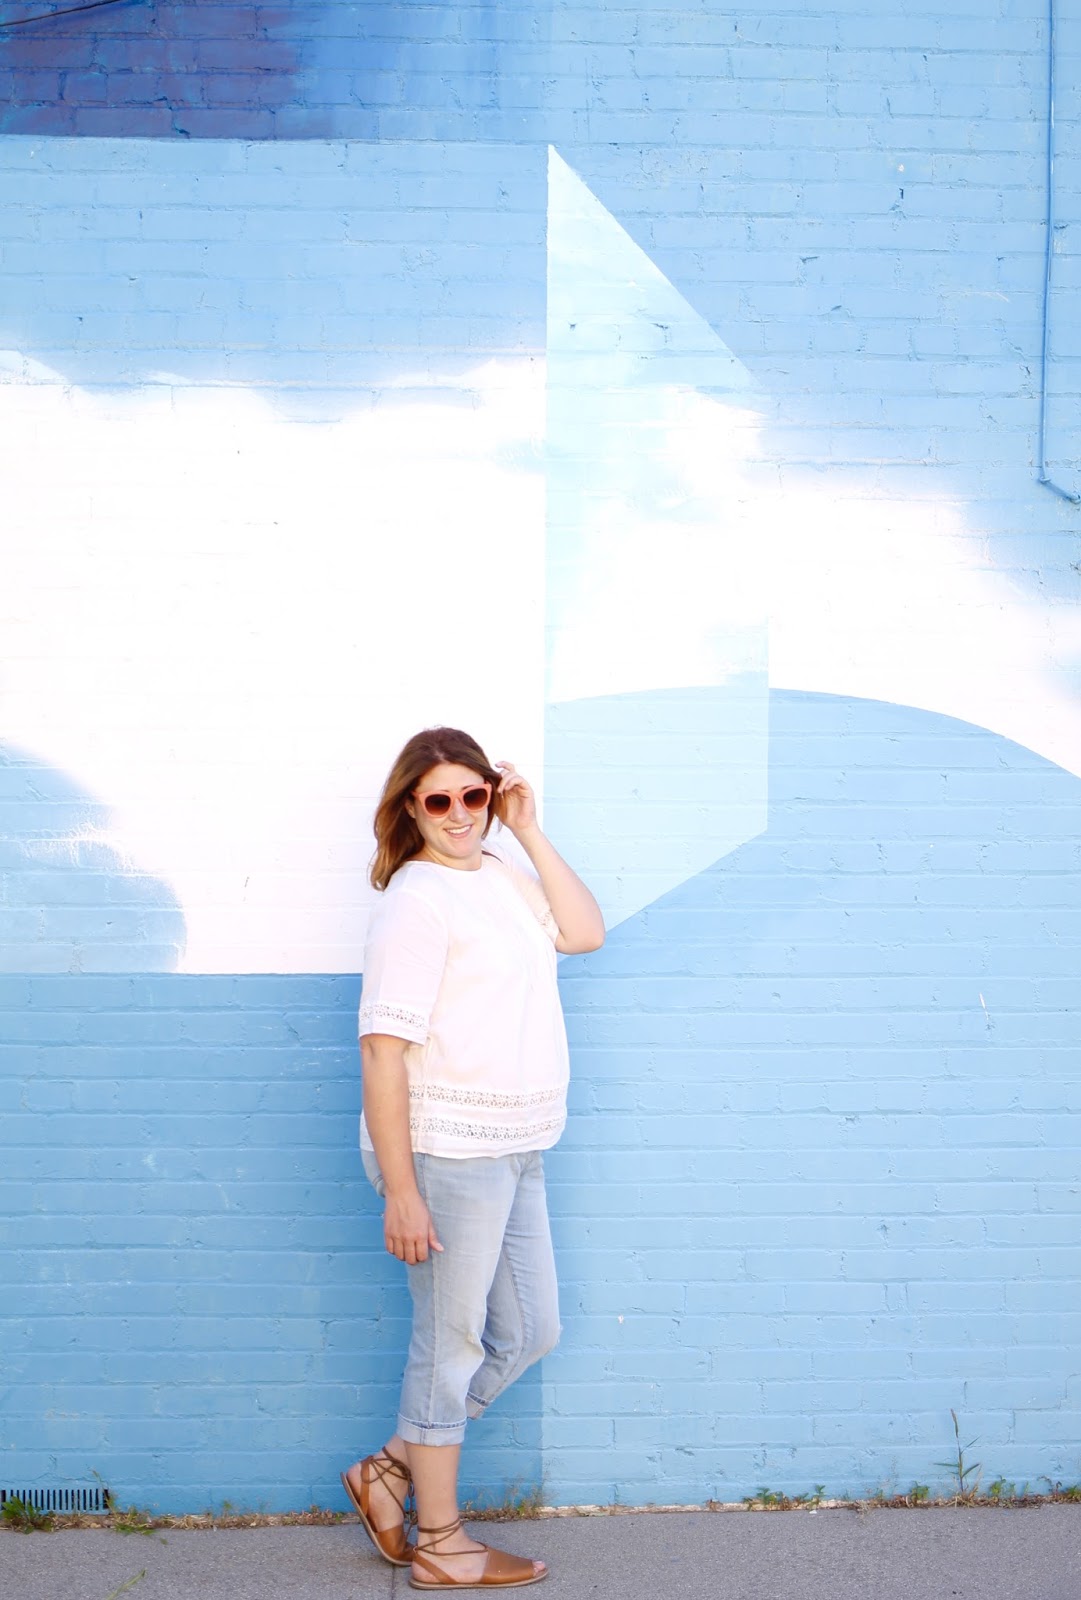 maternity style, pregnancy outfit, swing top, Salt Lake city Mural